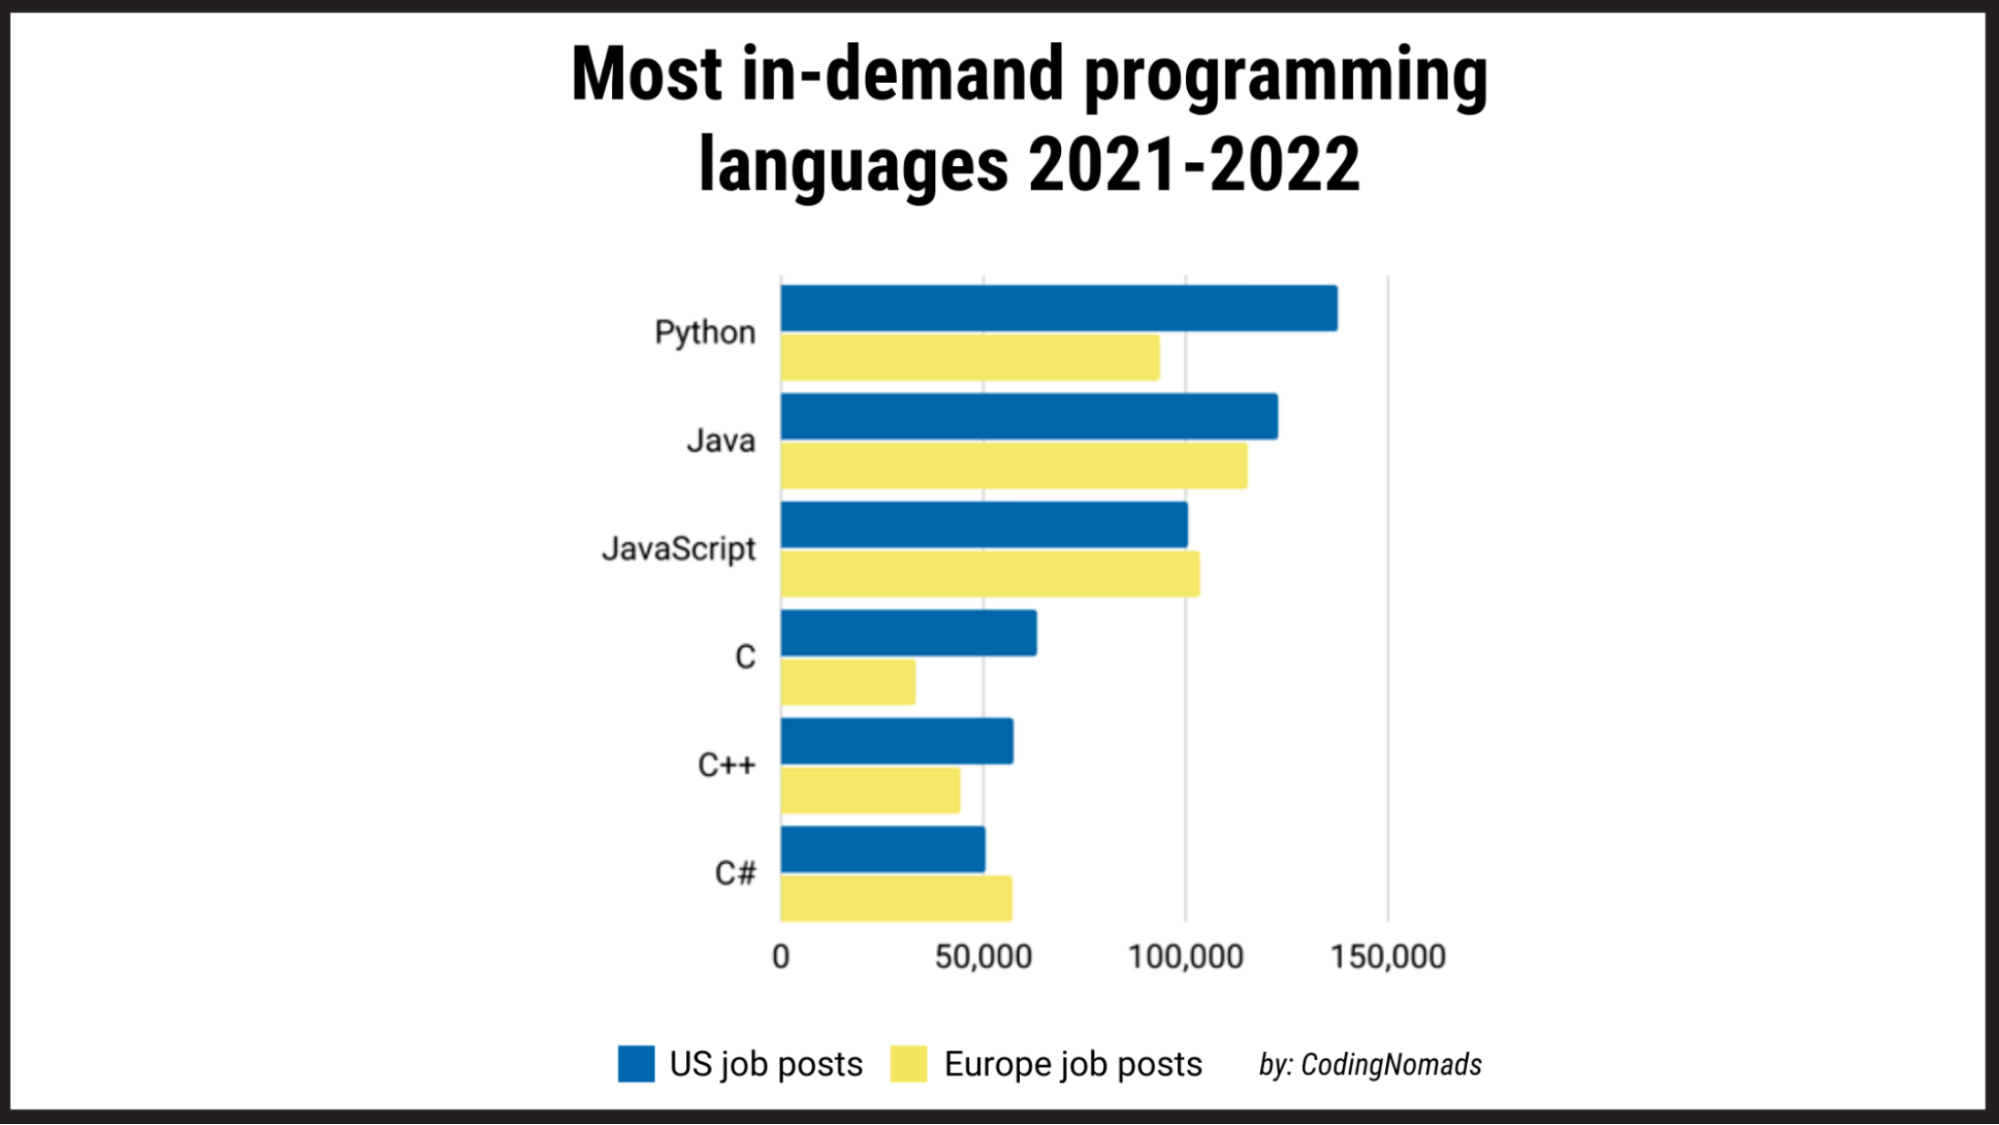 Are Python Developers in Demand